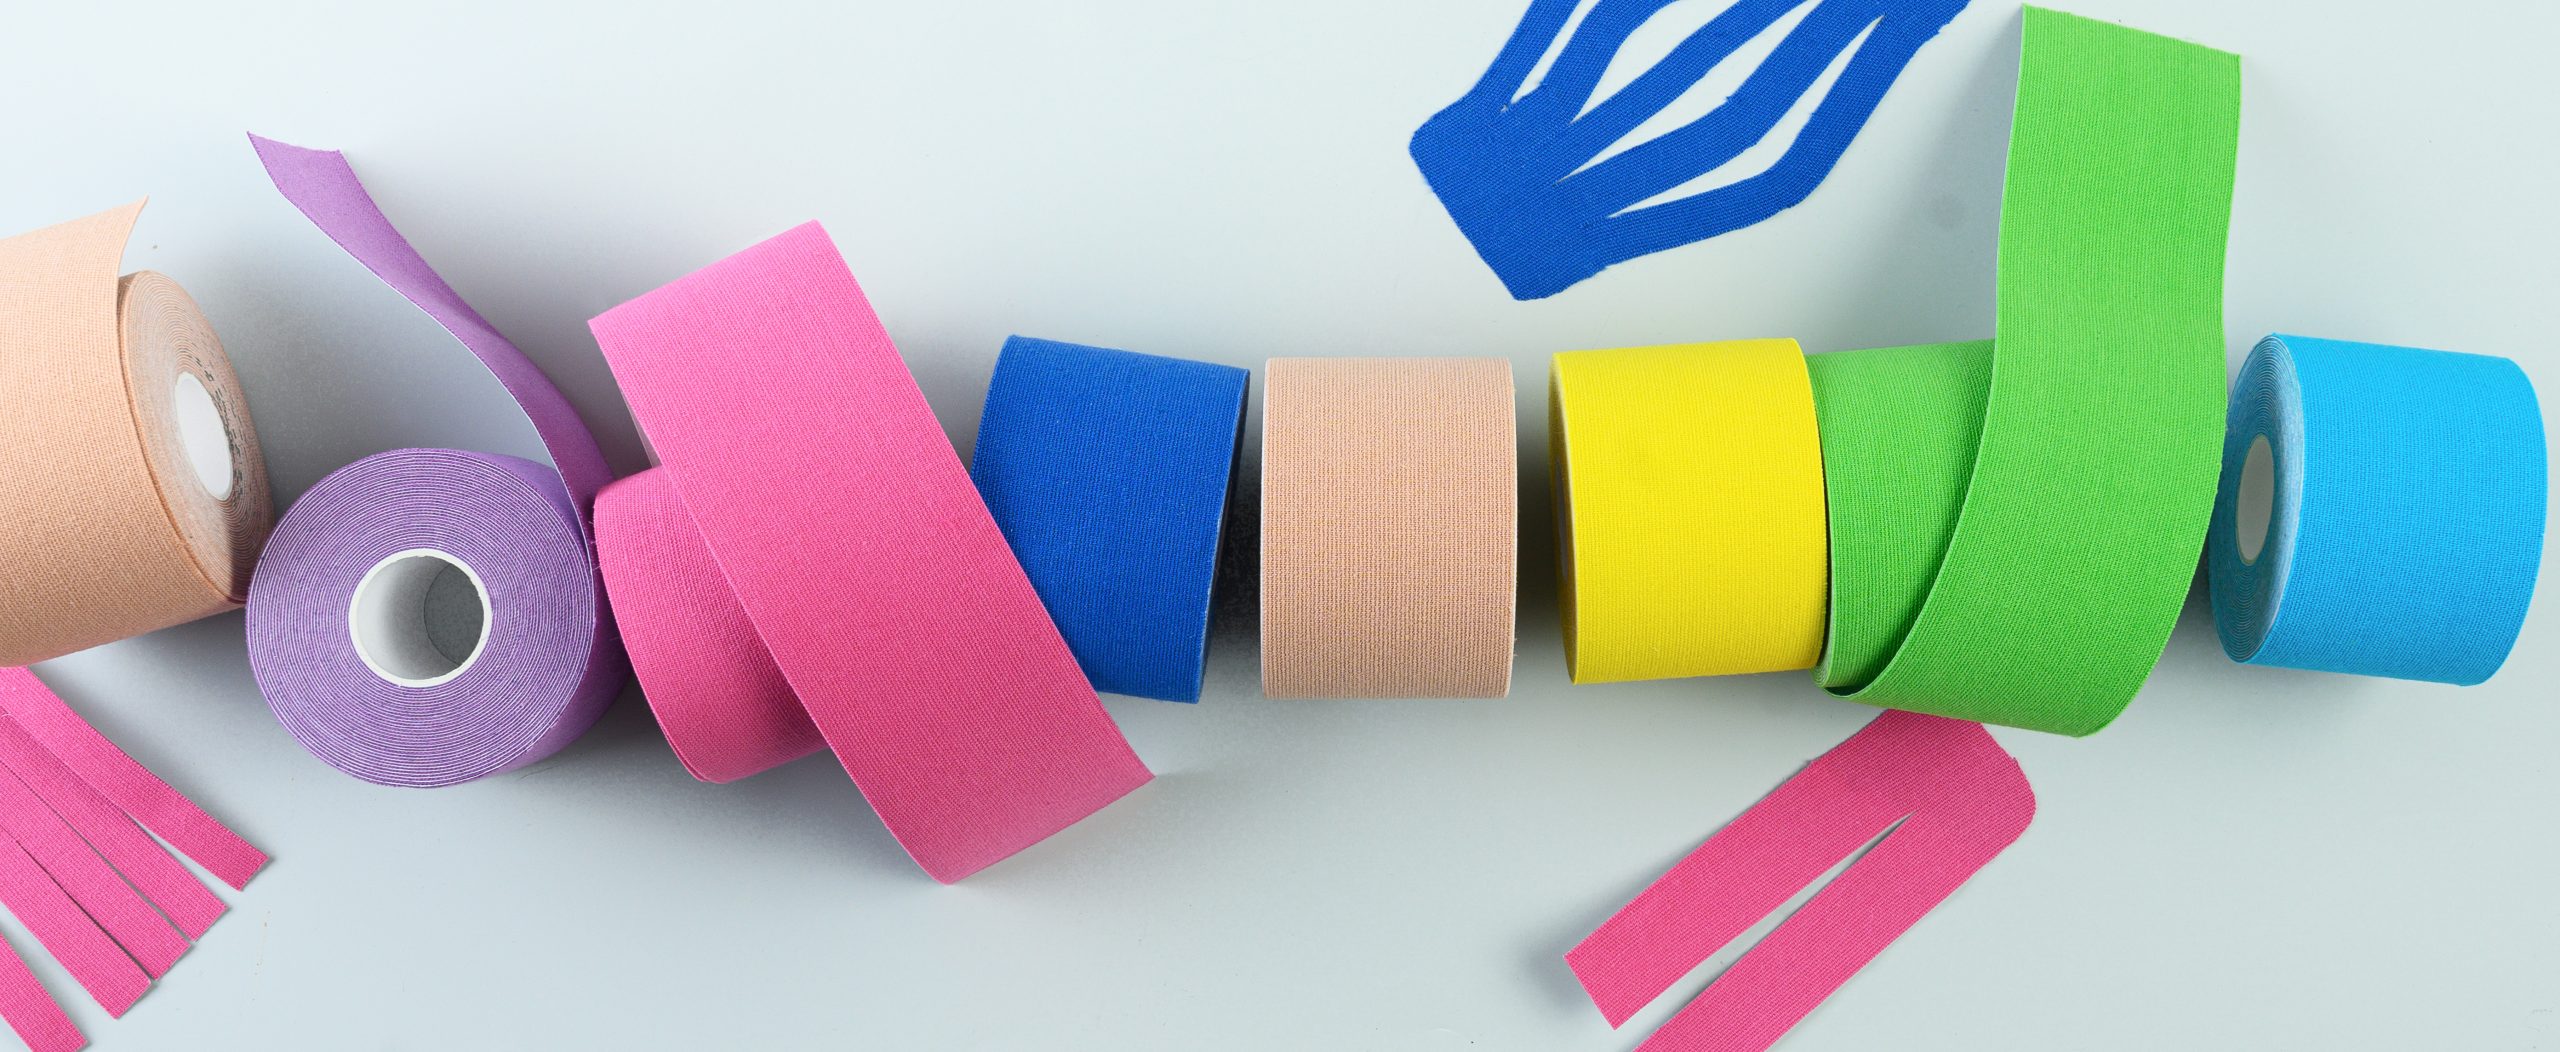 image shows various rolls of kinesiology tape and athletic tape